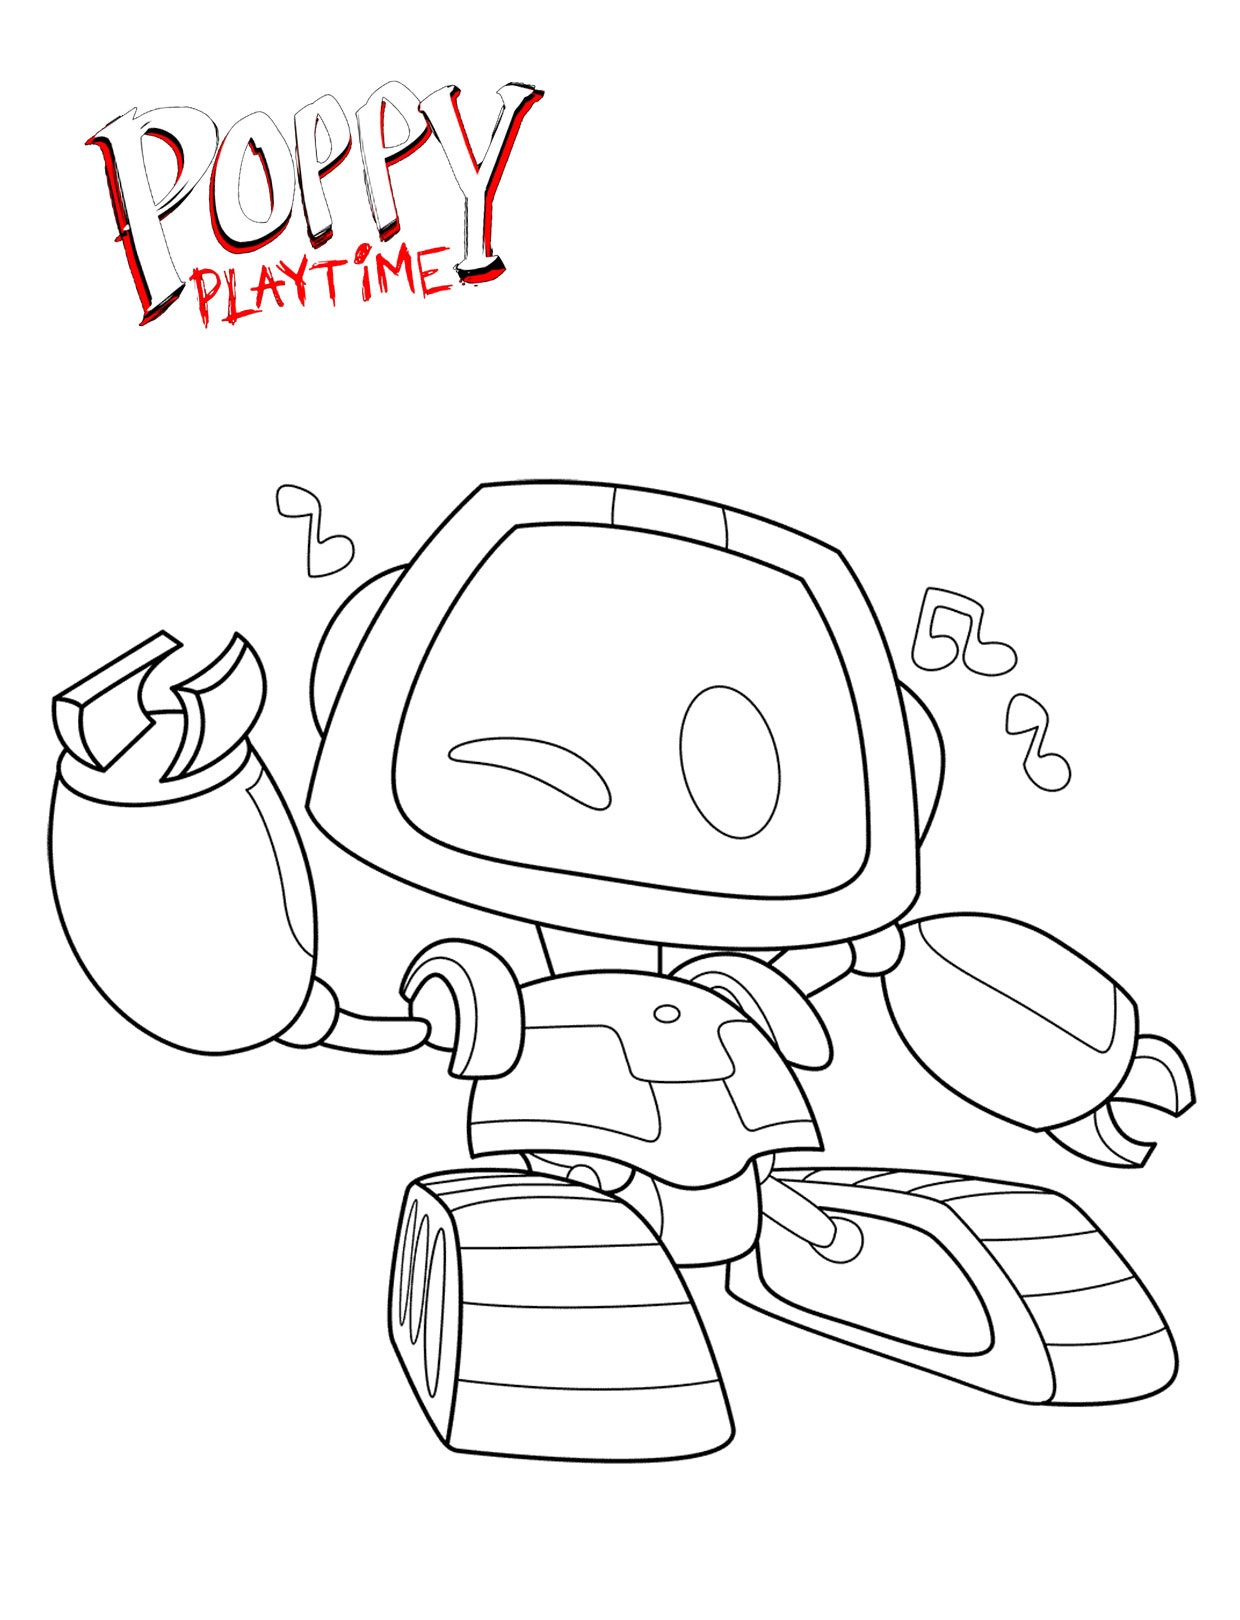 Boogie Bot From Poppy Playtime Coloring Page 1